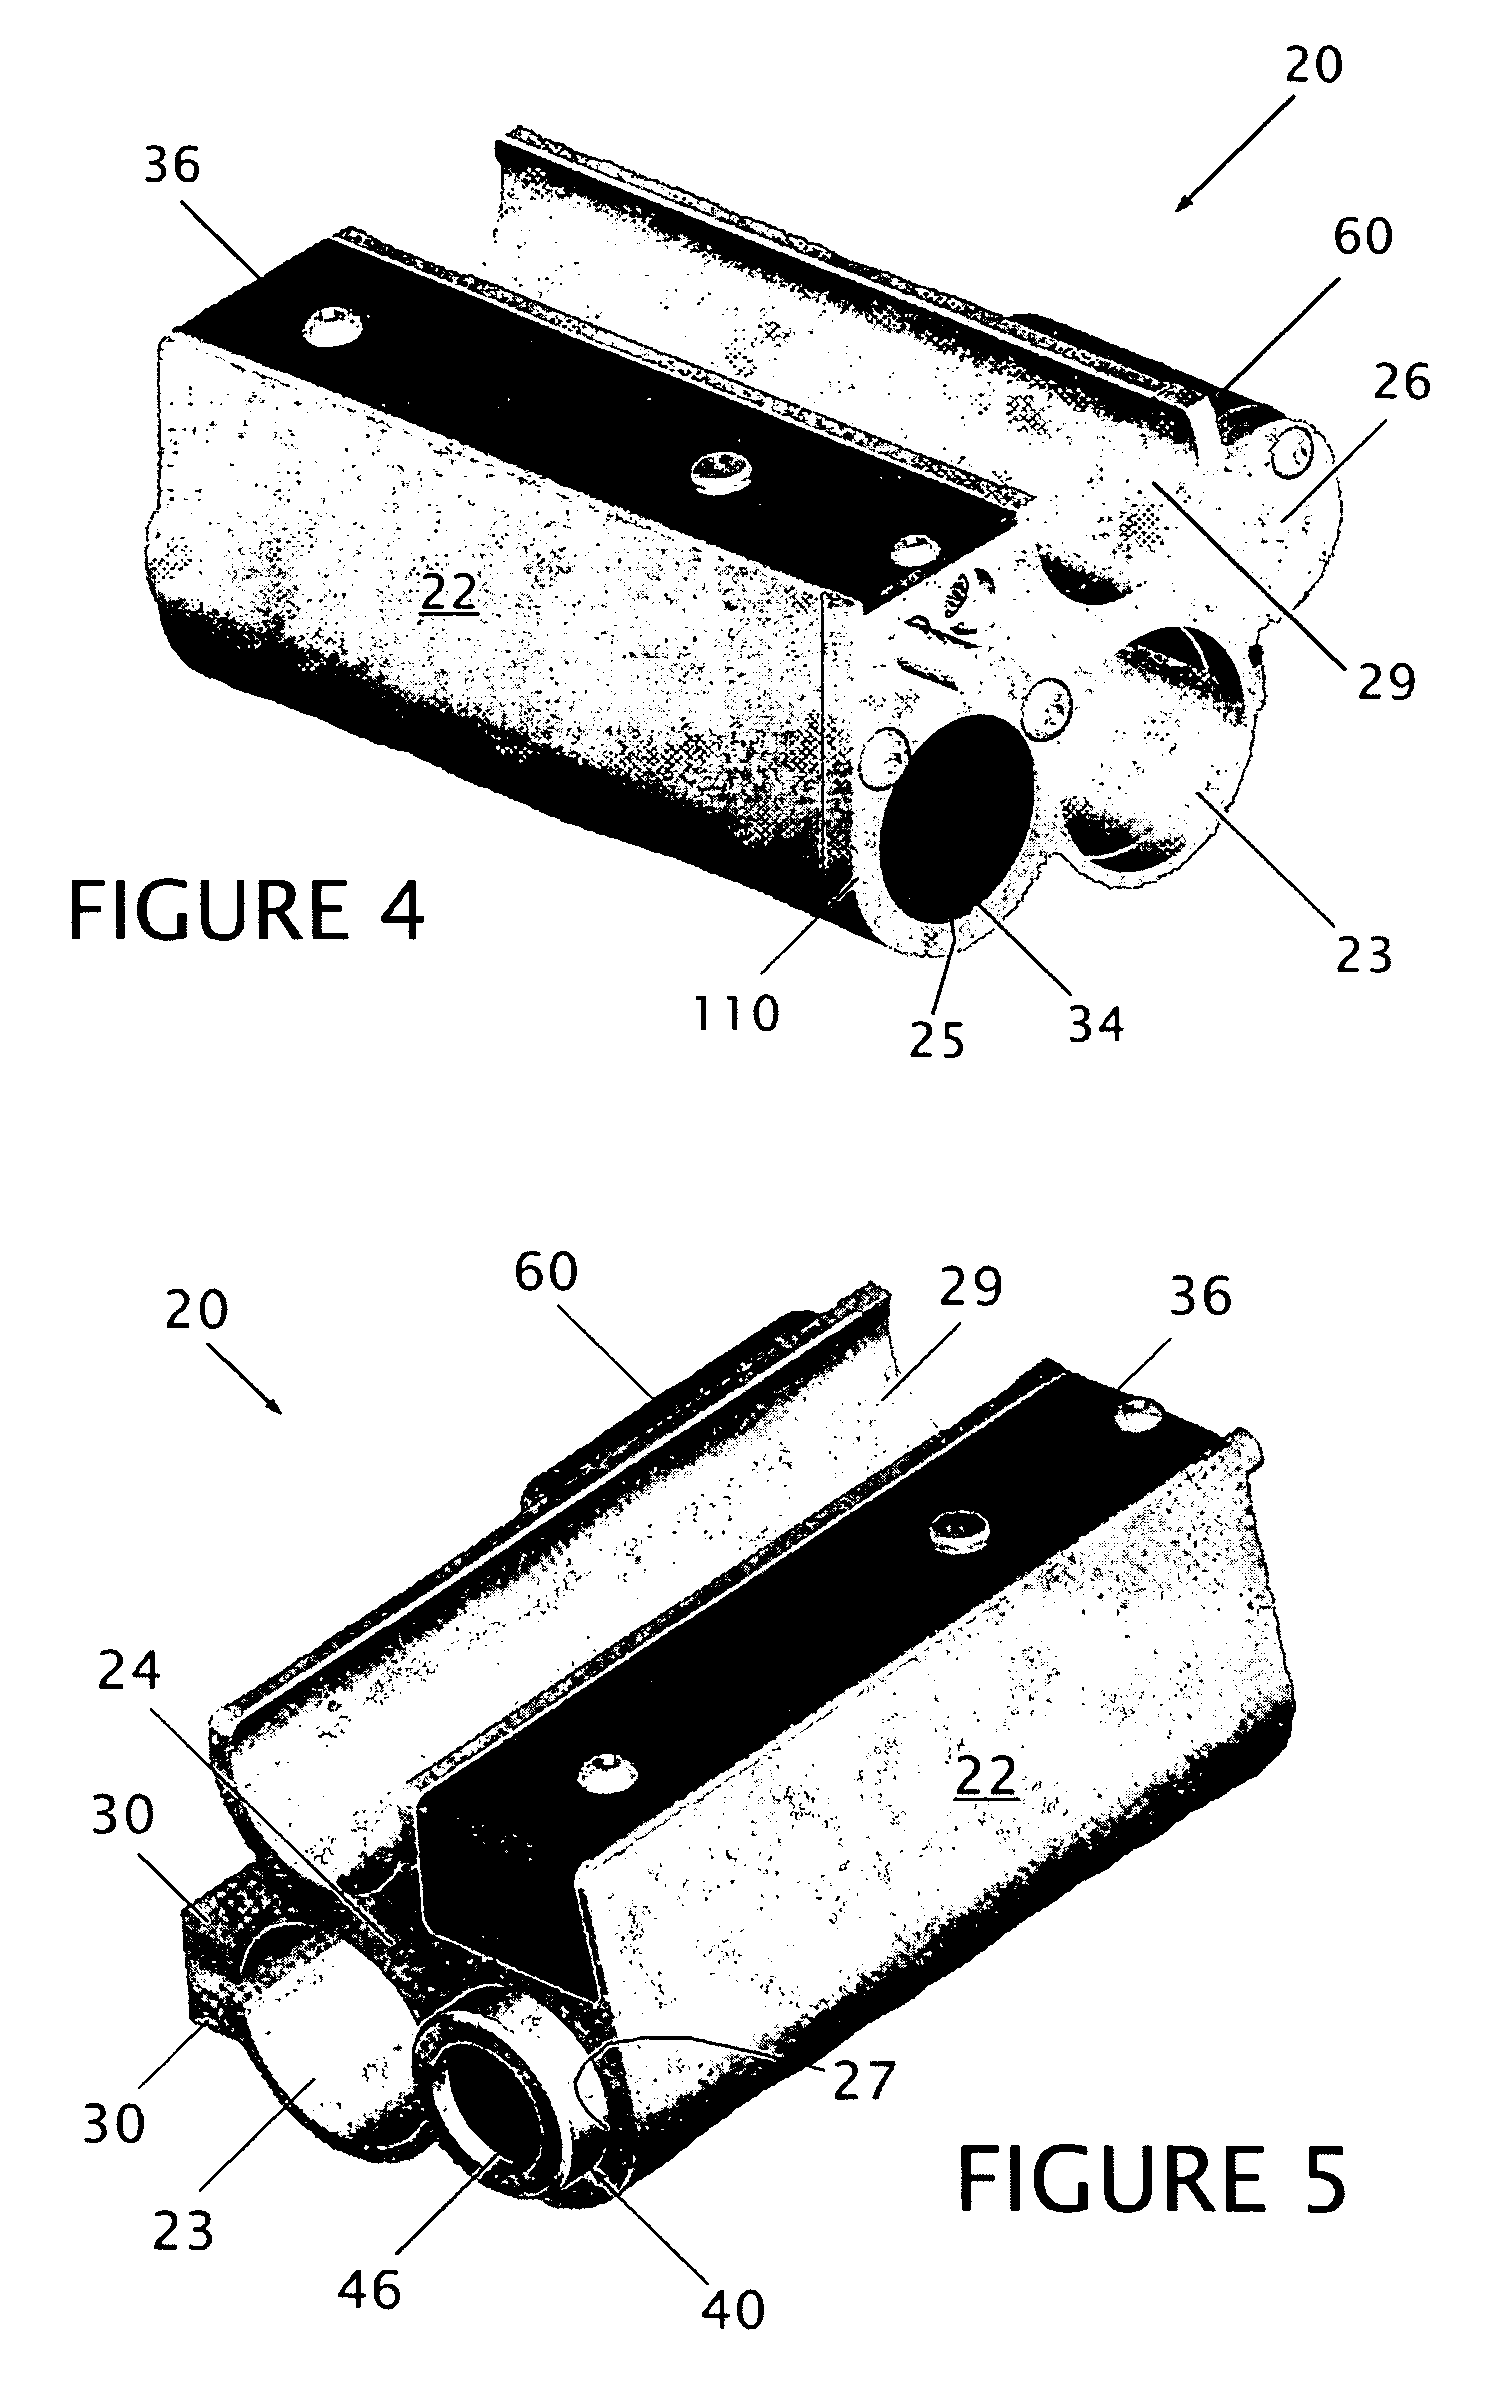 Target illuminating assembly having integrated magazine tube and barrel clamp with laser sight